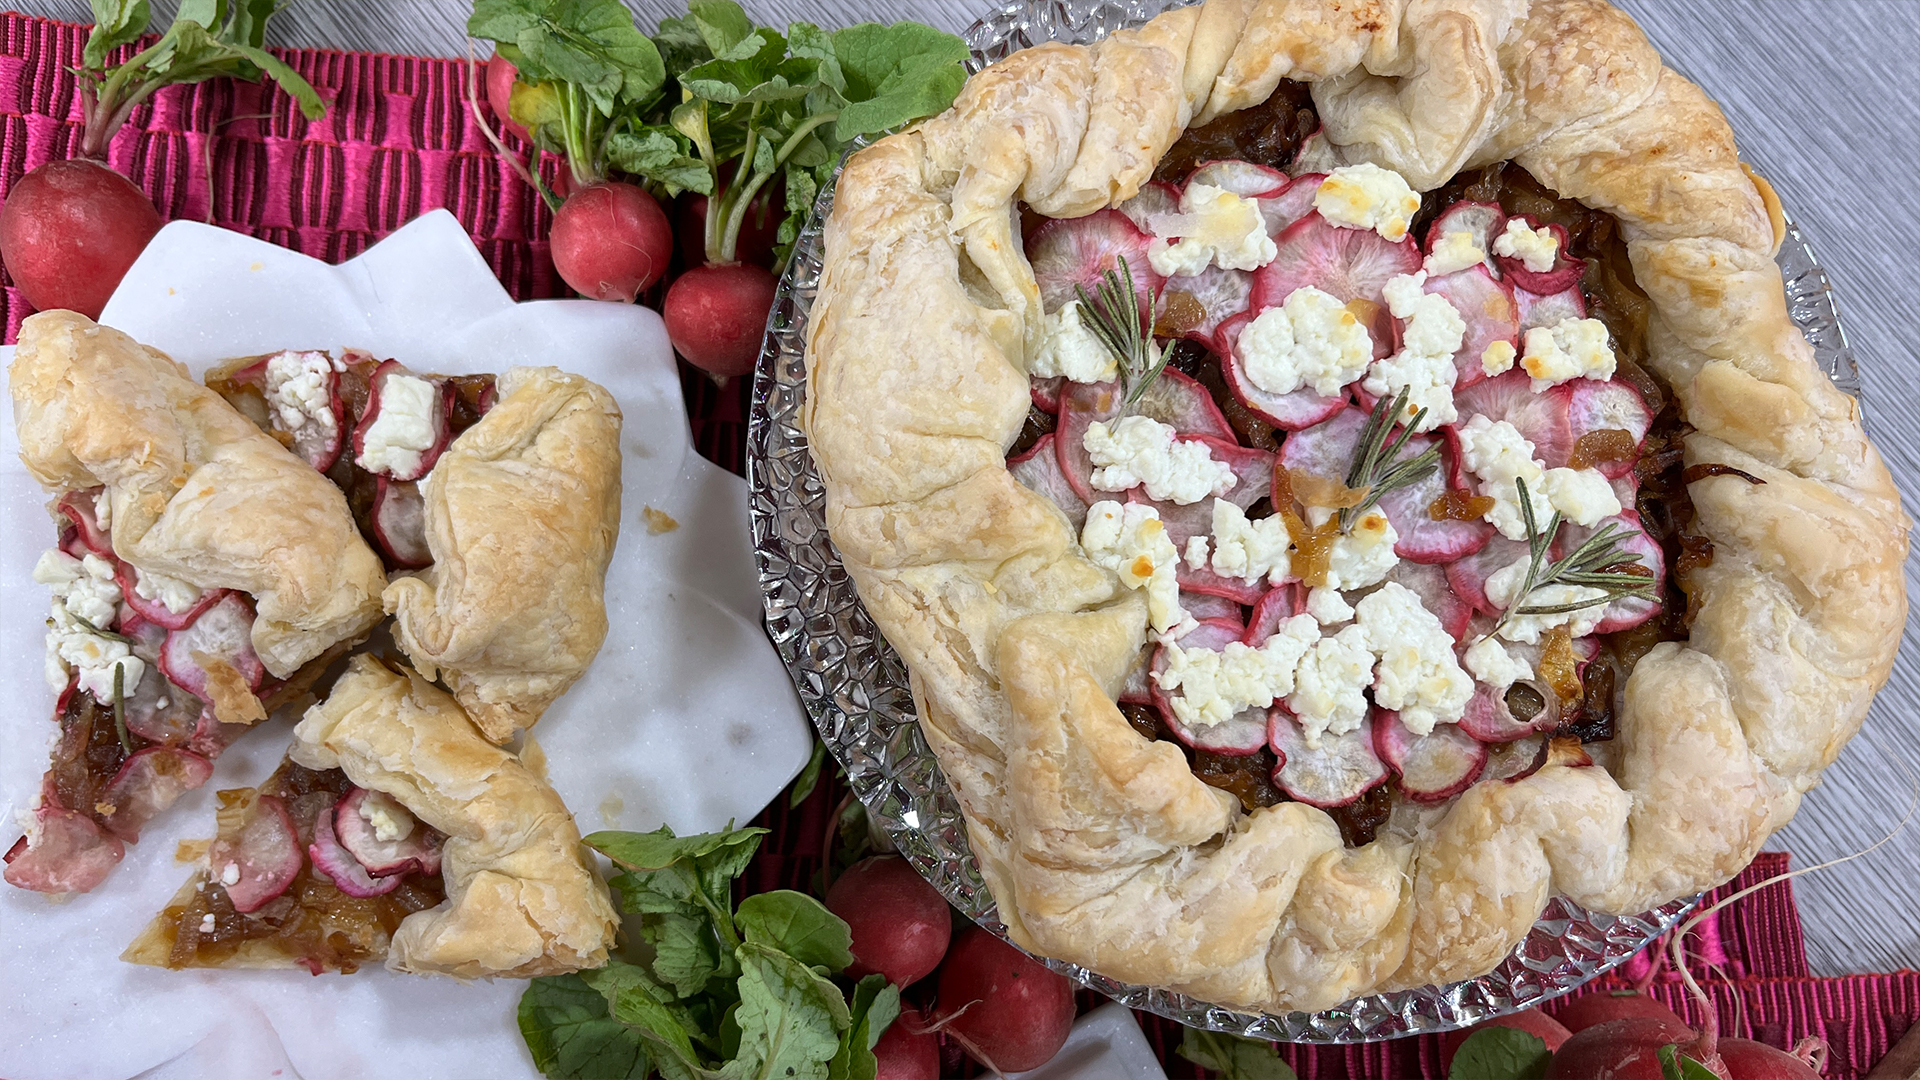 Caramelized onion and radish galette, with goat cheese and rosemary